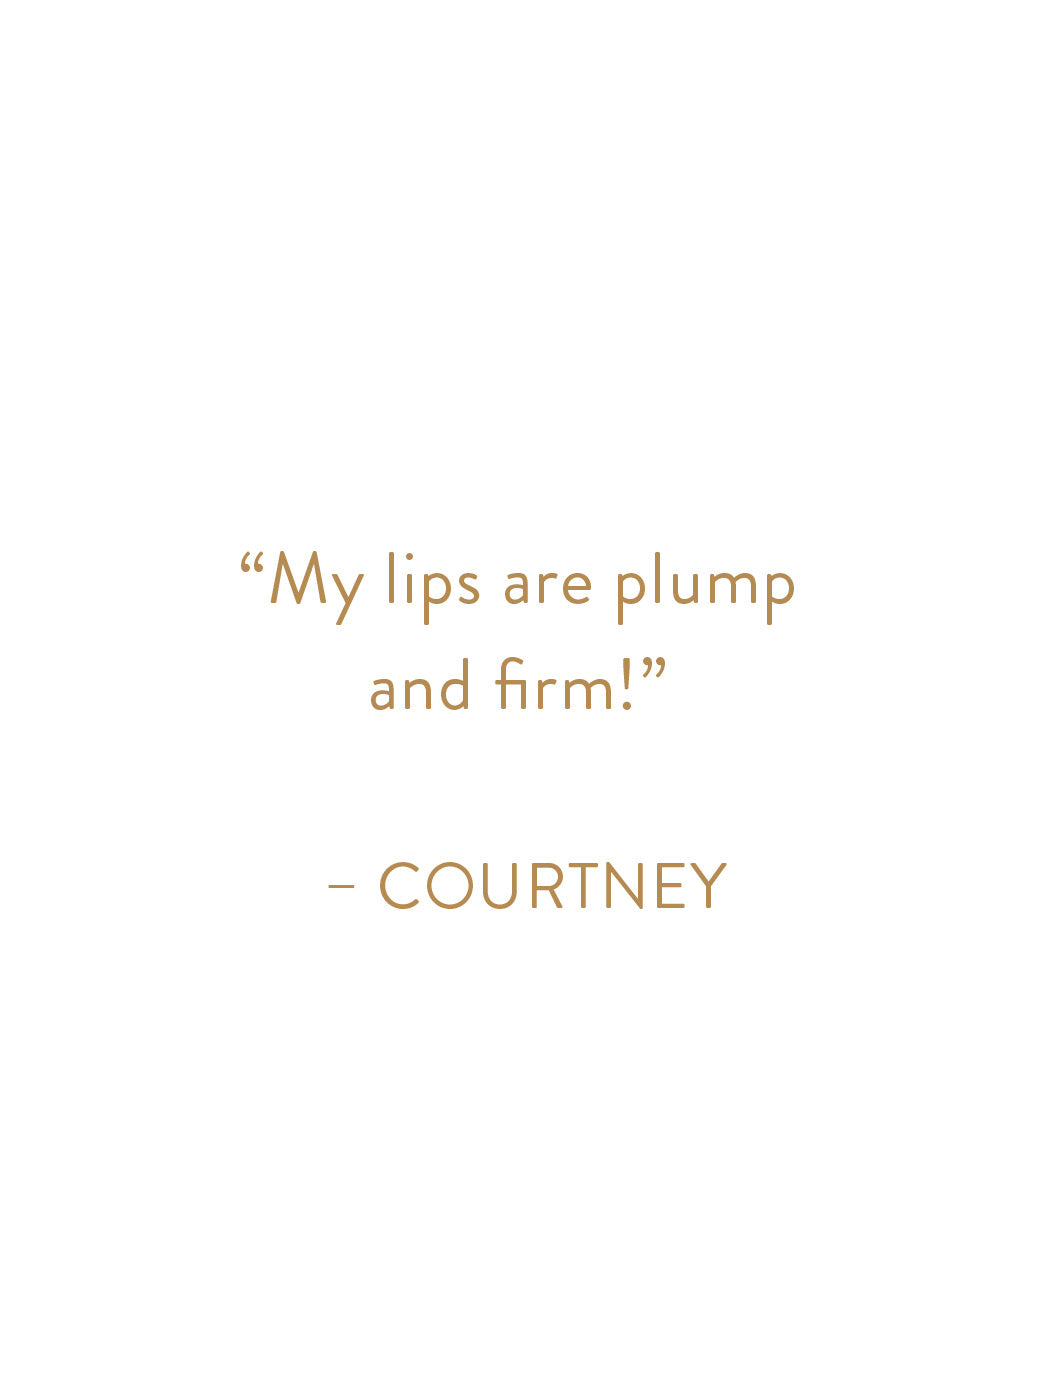 "My lips are plump and firm!" - Courtney